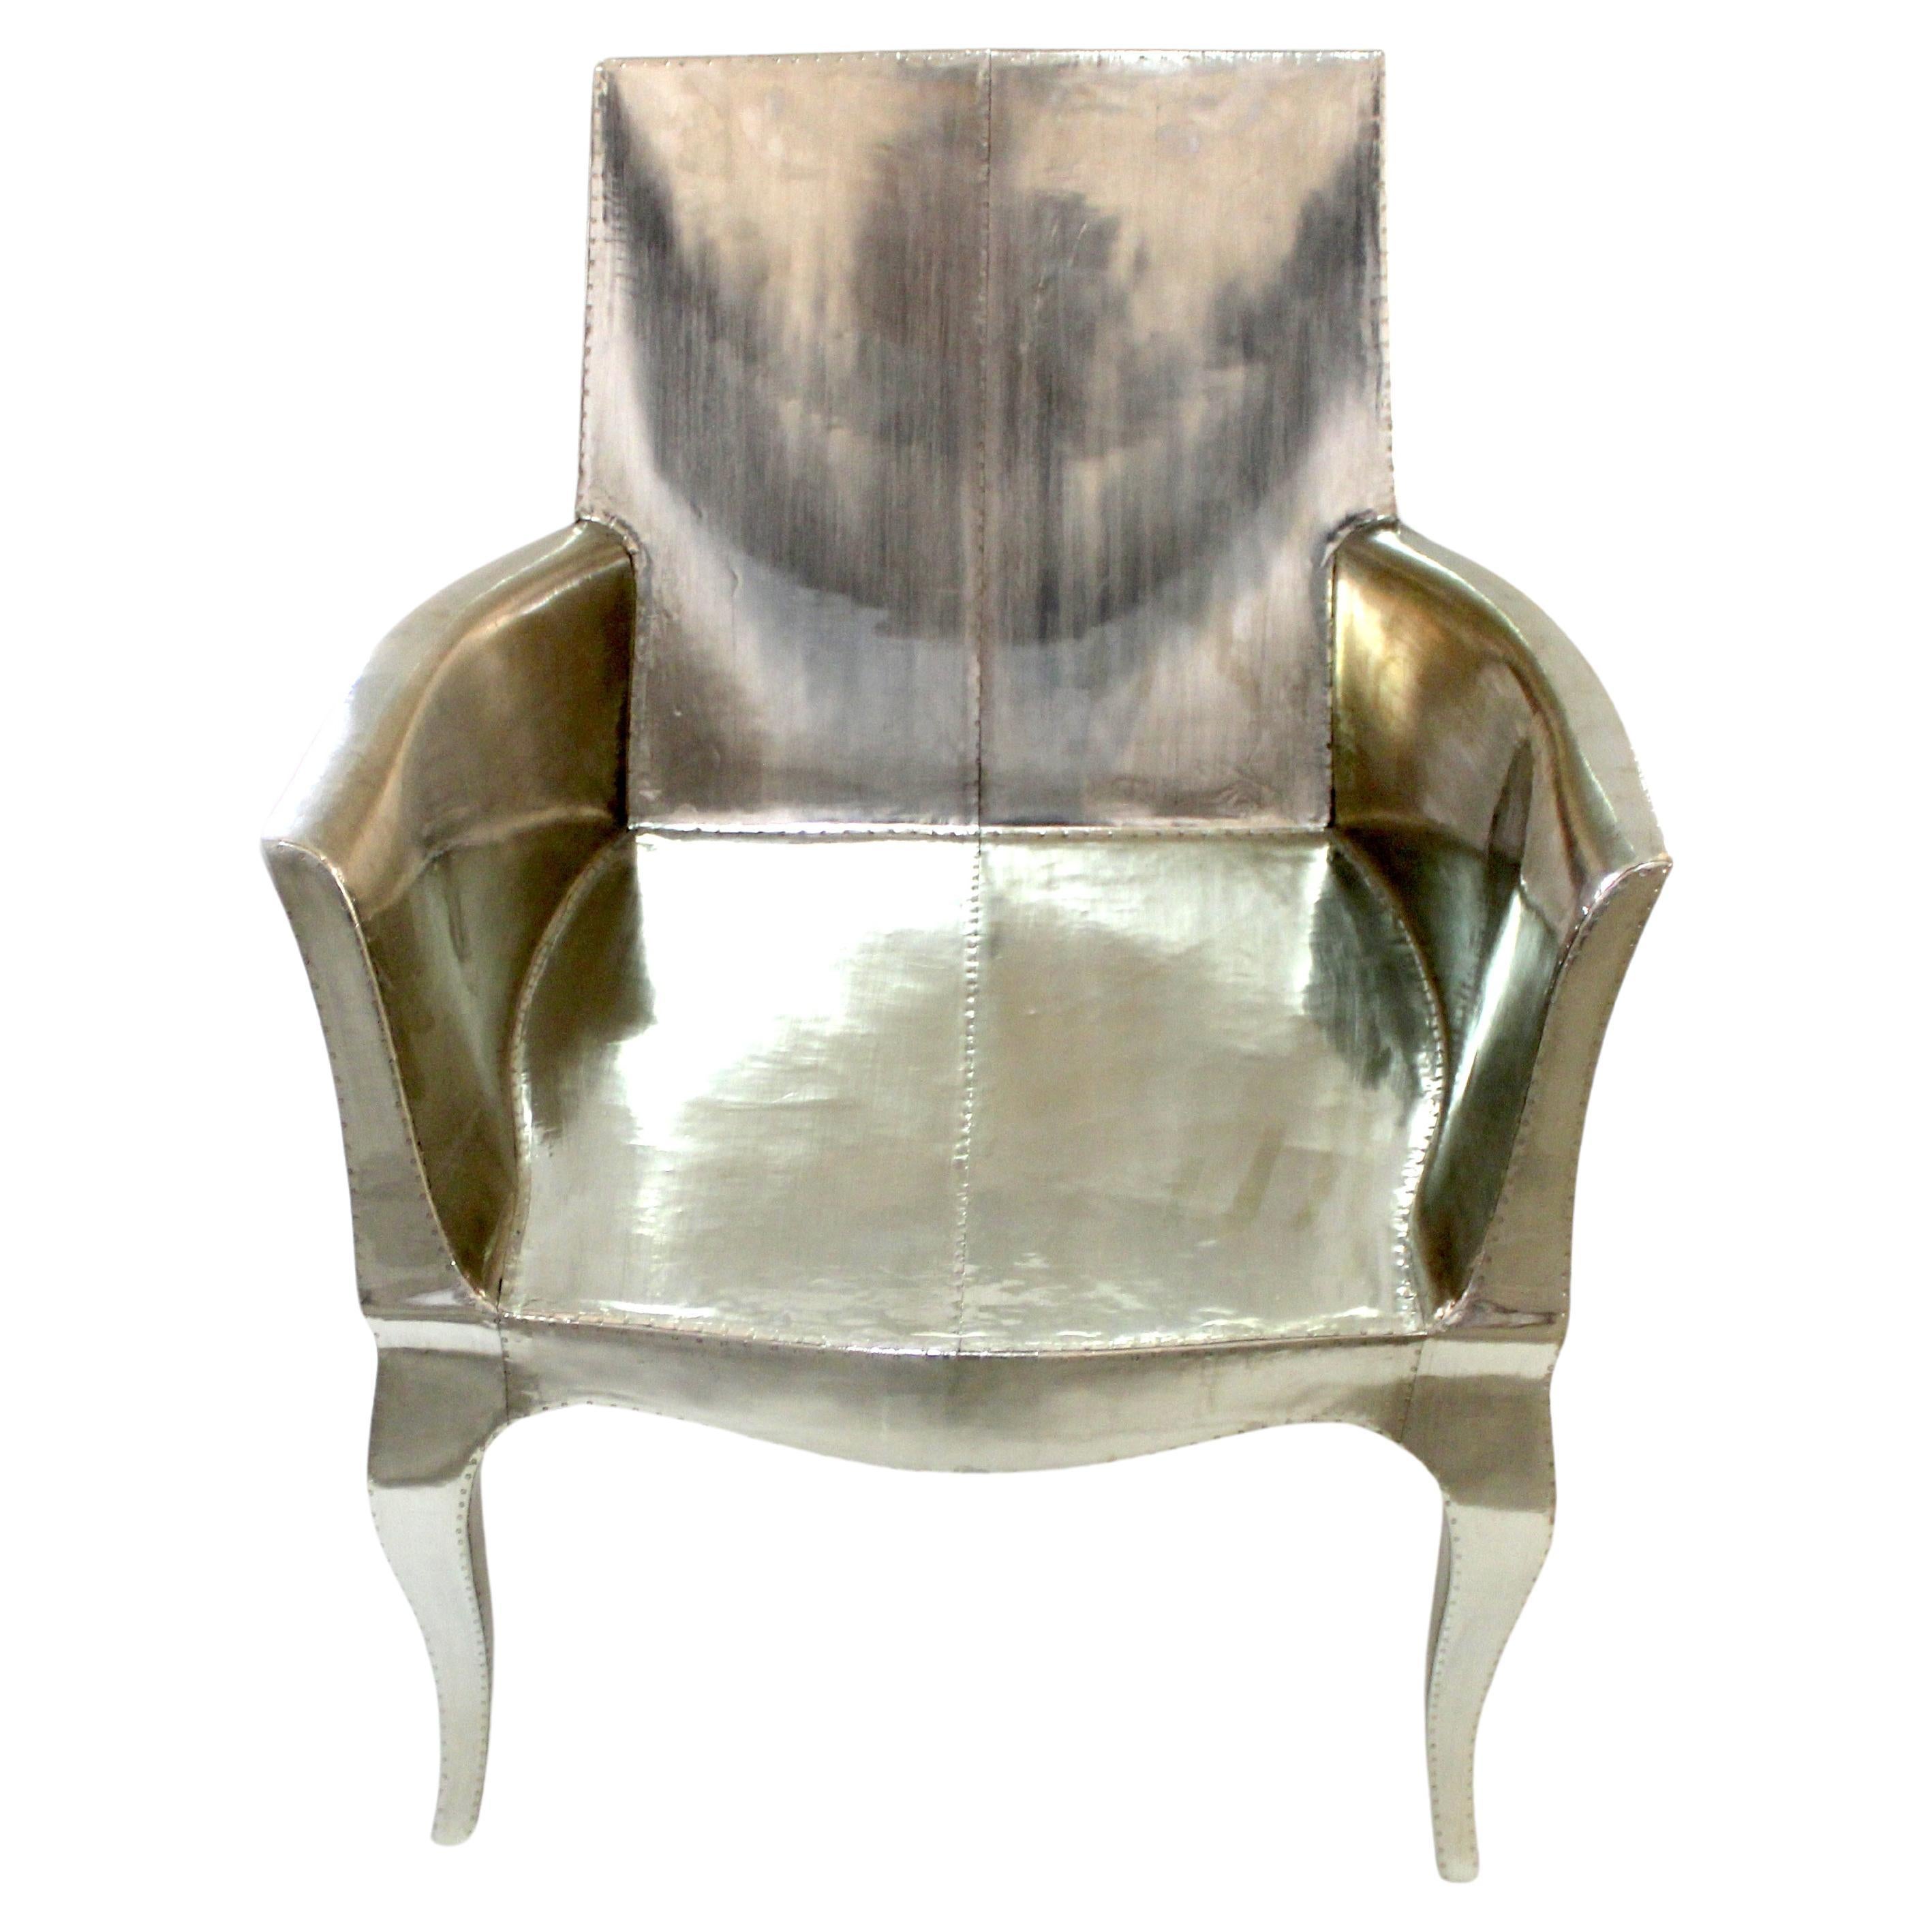 Art Nouveau Chairs in Smooth White Bronze by Paul Mathieu for S. Odegard